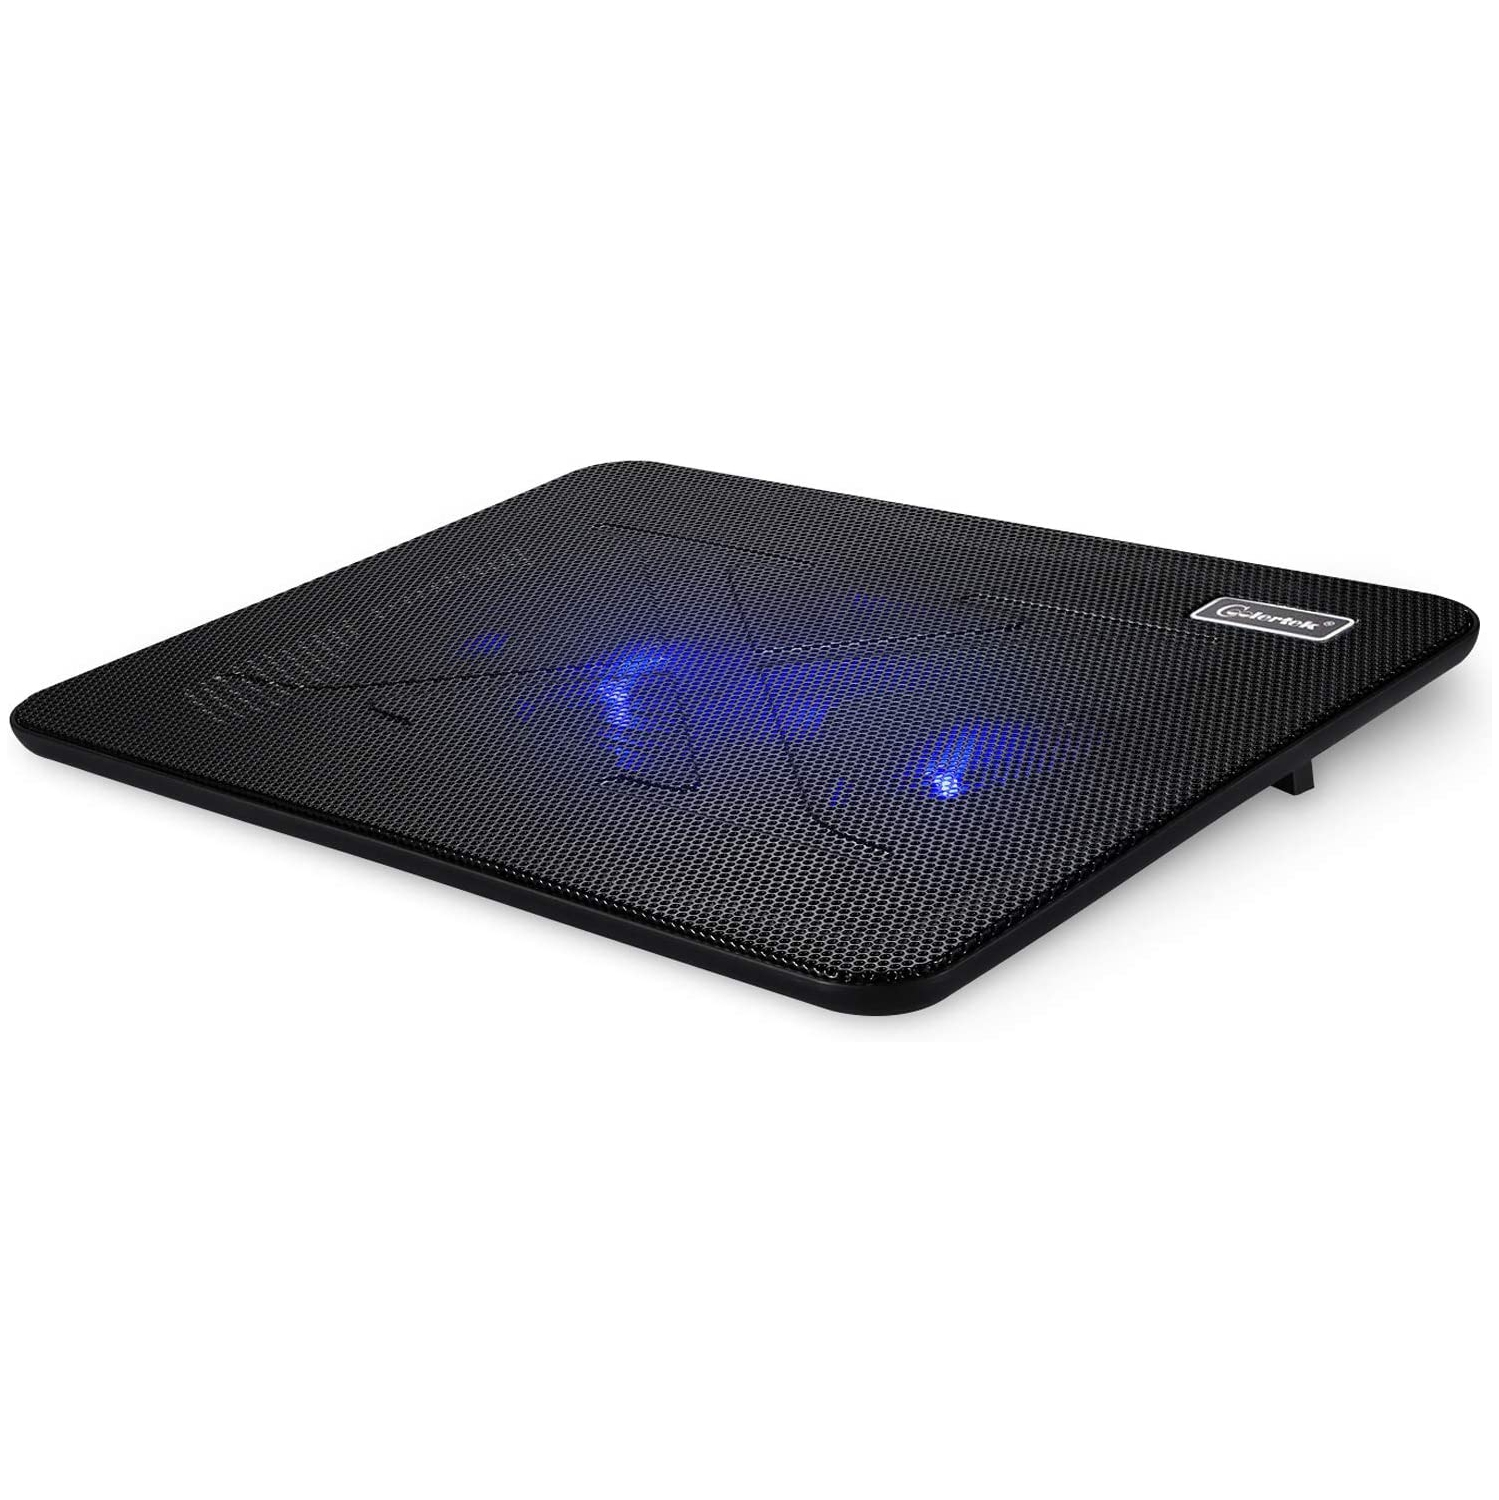 Laptop Cooling Pad, Portable Slim Quiet Laptop Notebook Cooler Cooling Pad Stand with 2 Blue LED Fans, USB